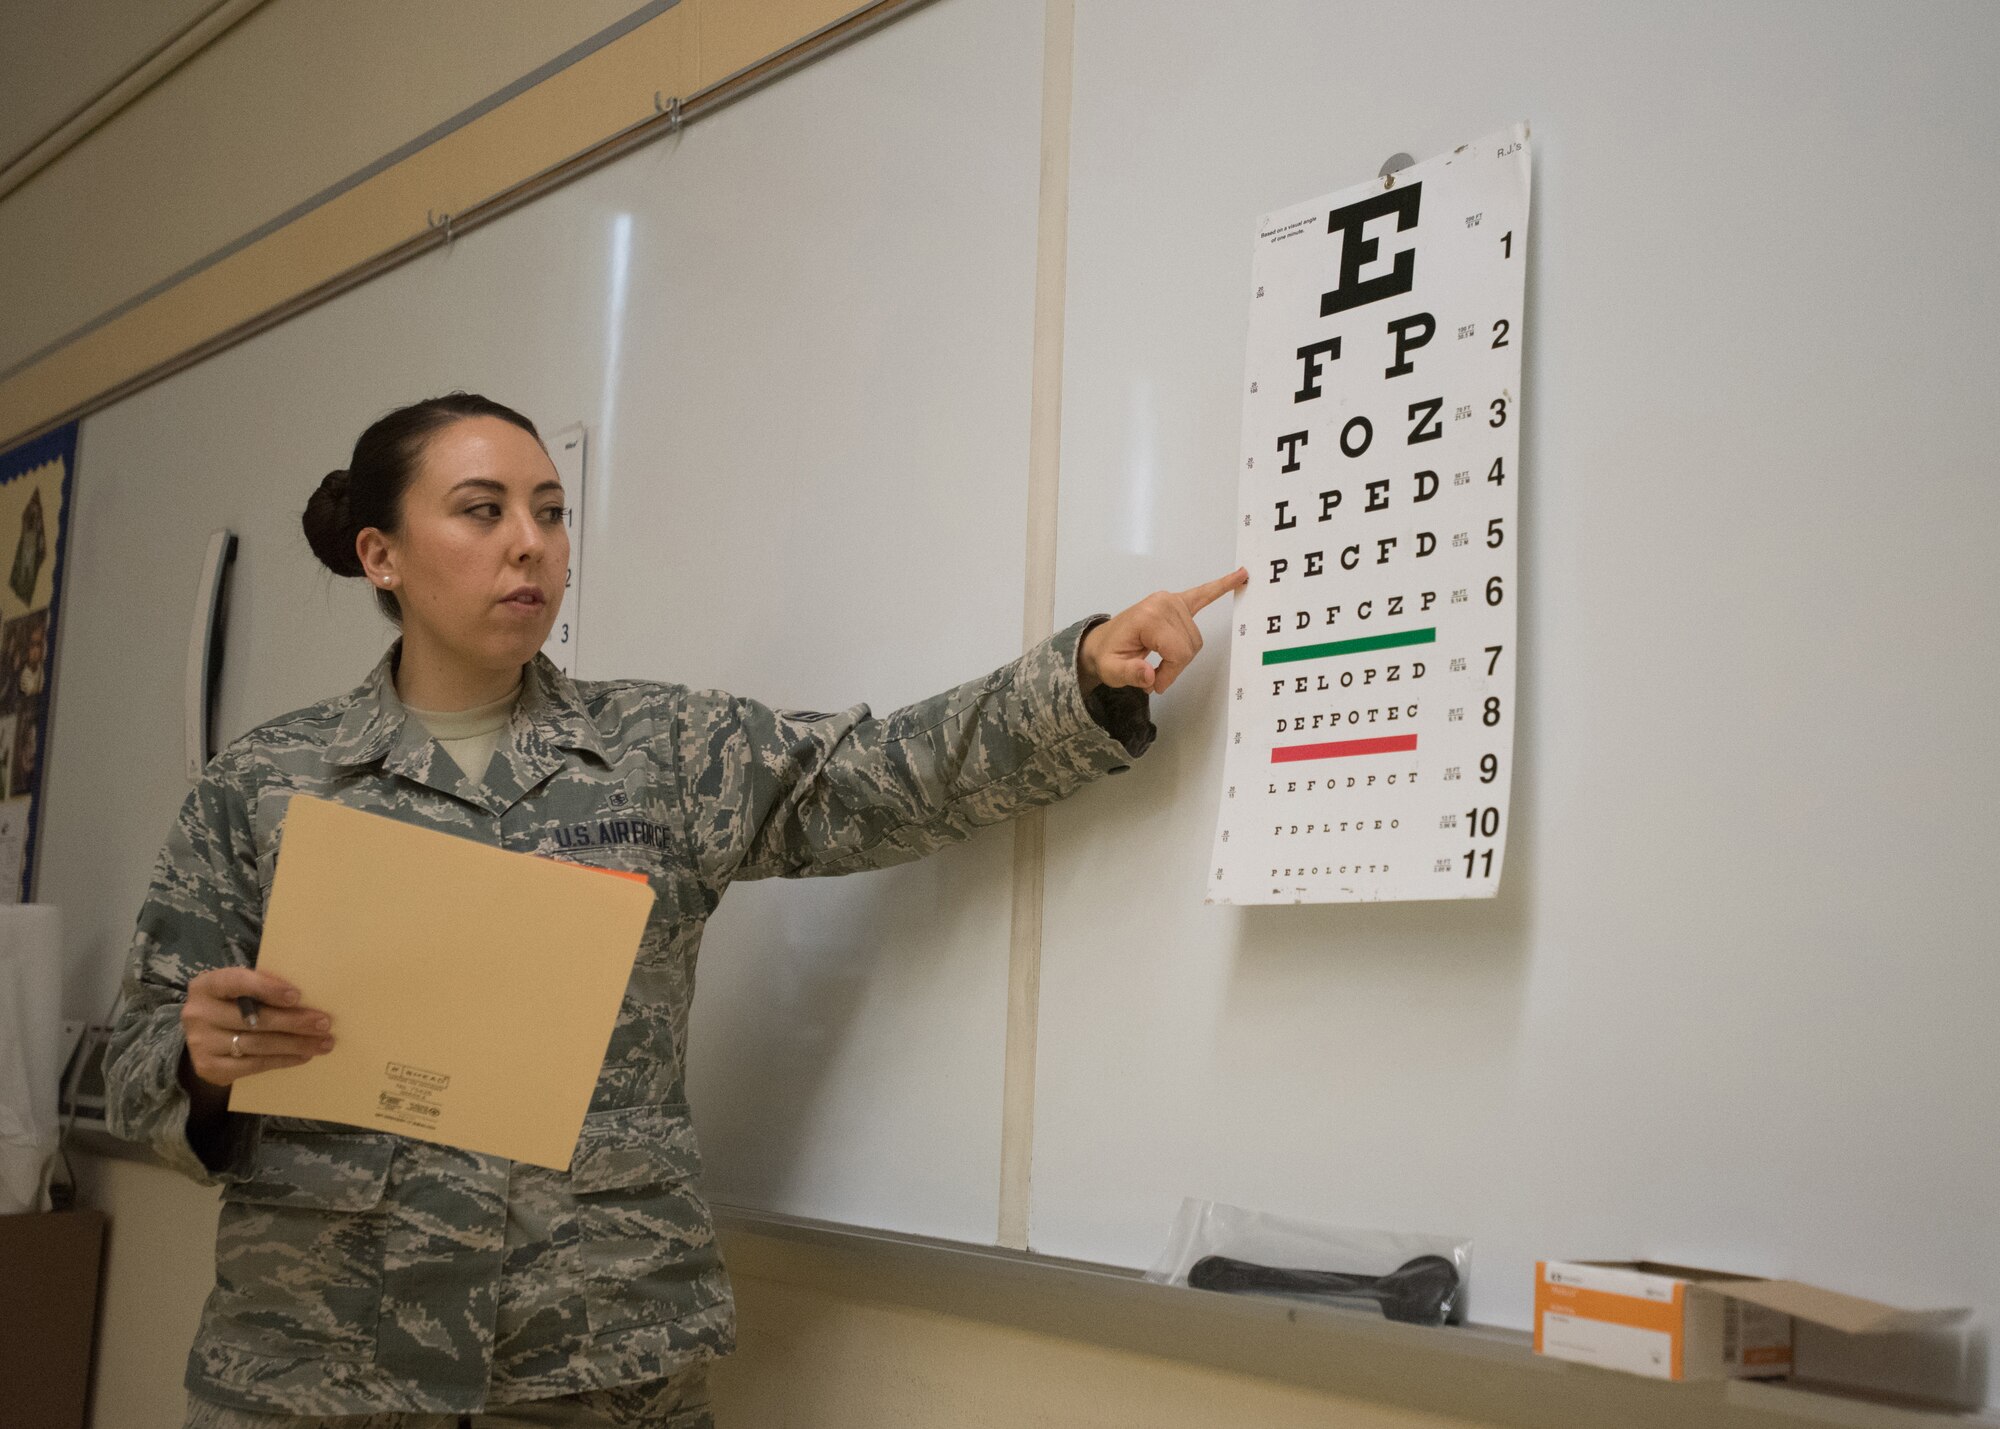 U.S. Air Force Airman 1st Class Danielle Fuhriman, an aerospace medical technician from the 173rd Medical Group, Oregon Air National Guard, conducts a vision test at Paducah Tilghman High School in Paducah, Ky., July 18, 2016, during Bluegrass Medical Innovative Readiness Training. The Kentucky Air National Guard, U.S. Navy Reserve and other military units are teaming with the Delta Regional Authority to offer medical and dental care at no cost to residents in three Western Kentucky locations from July 18 to 27 as part of the training event. (U.S. Air National Guard photo by Master Sgt. Phil Speck)